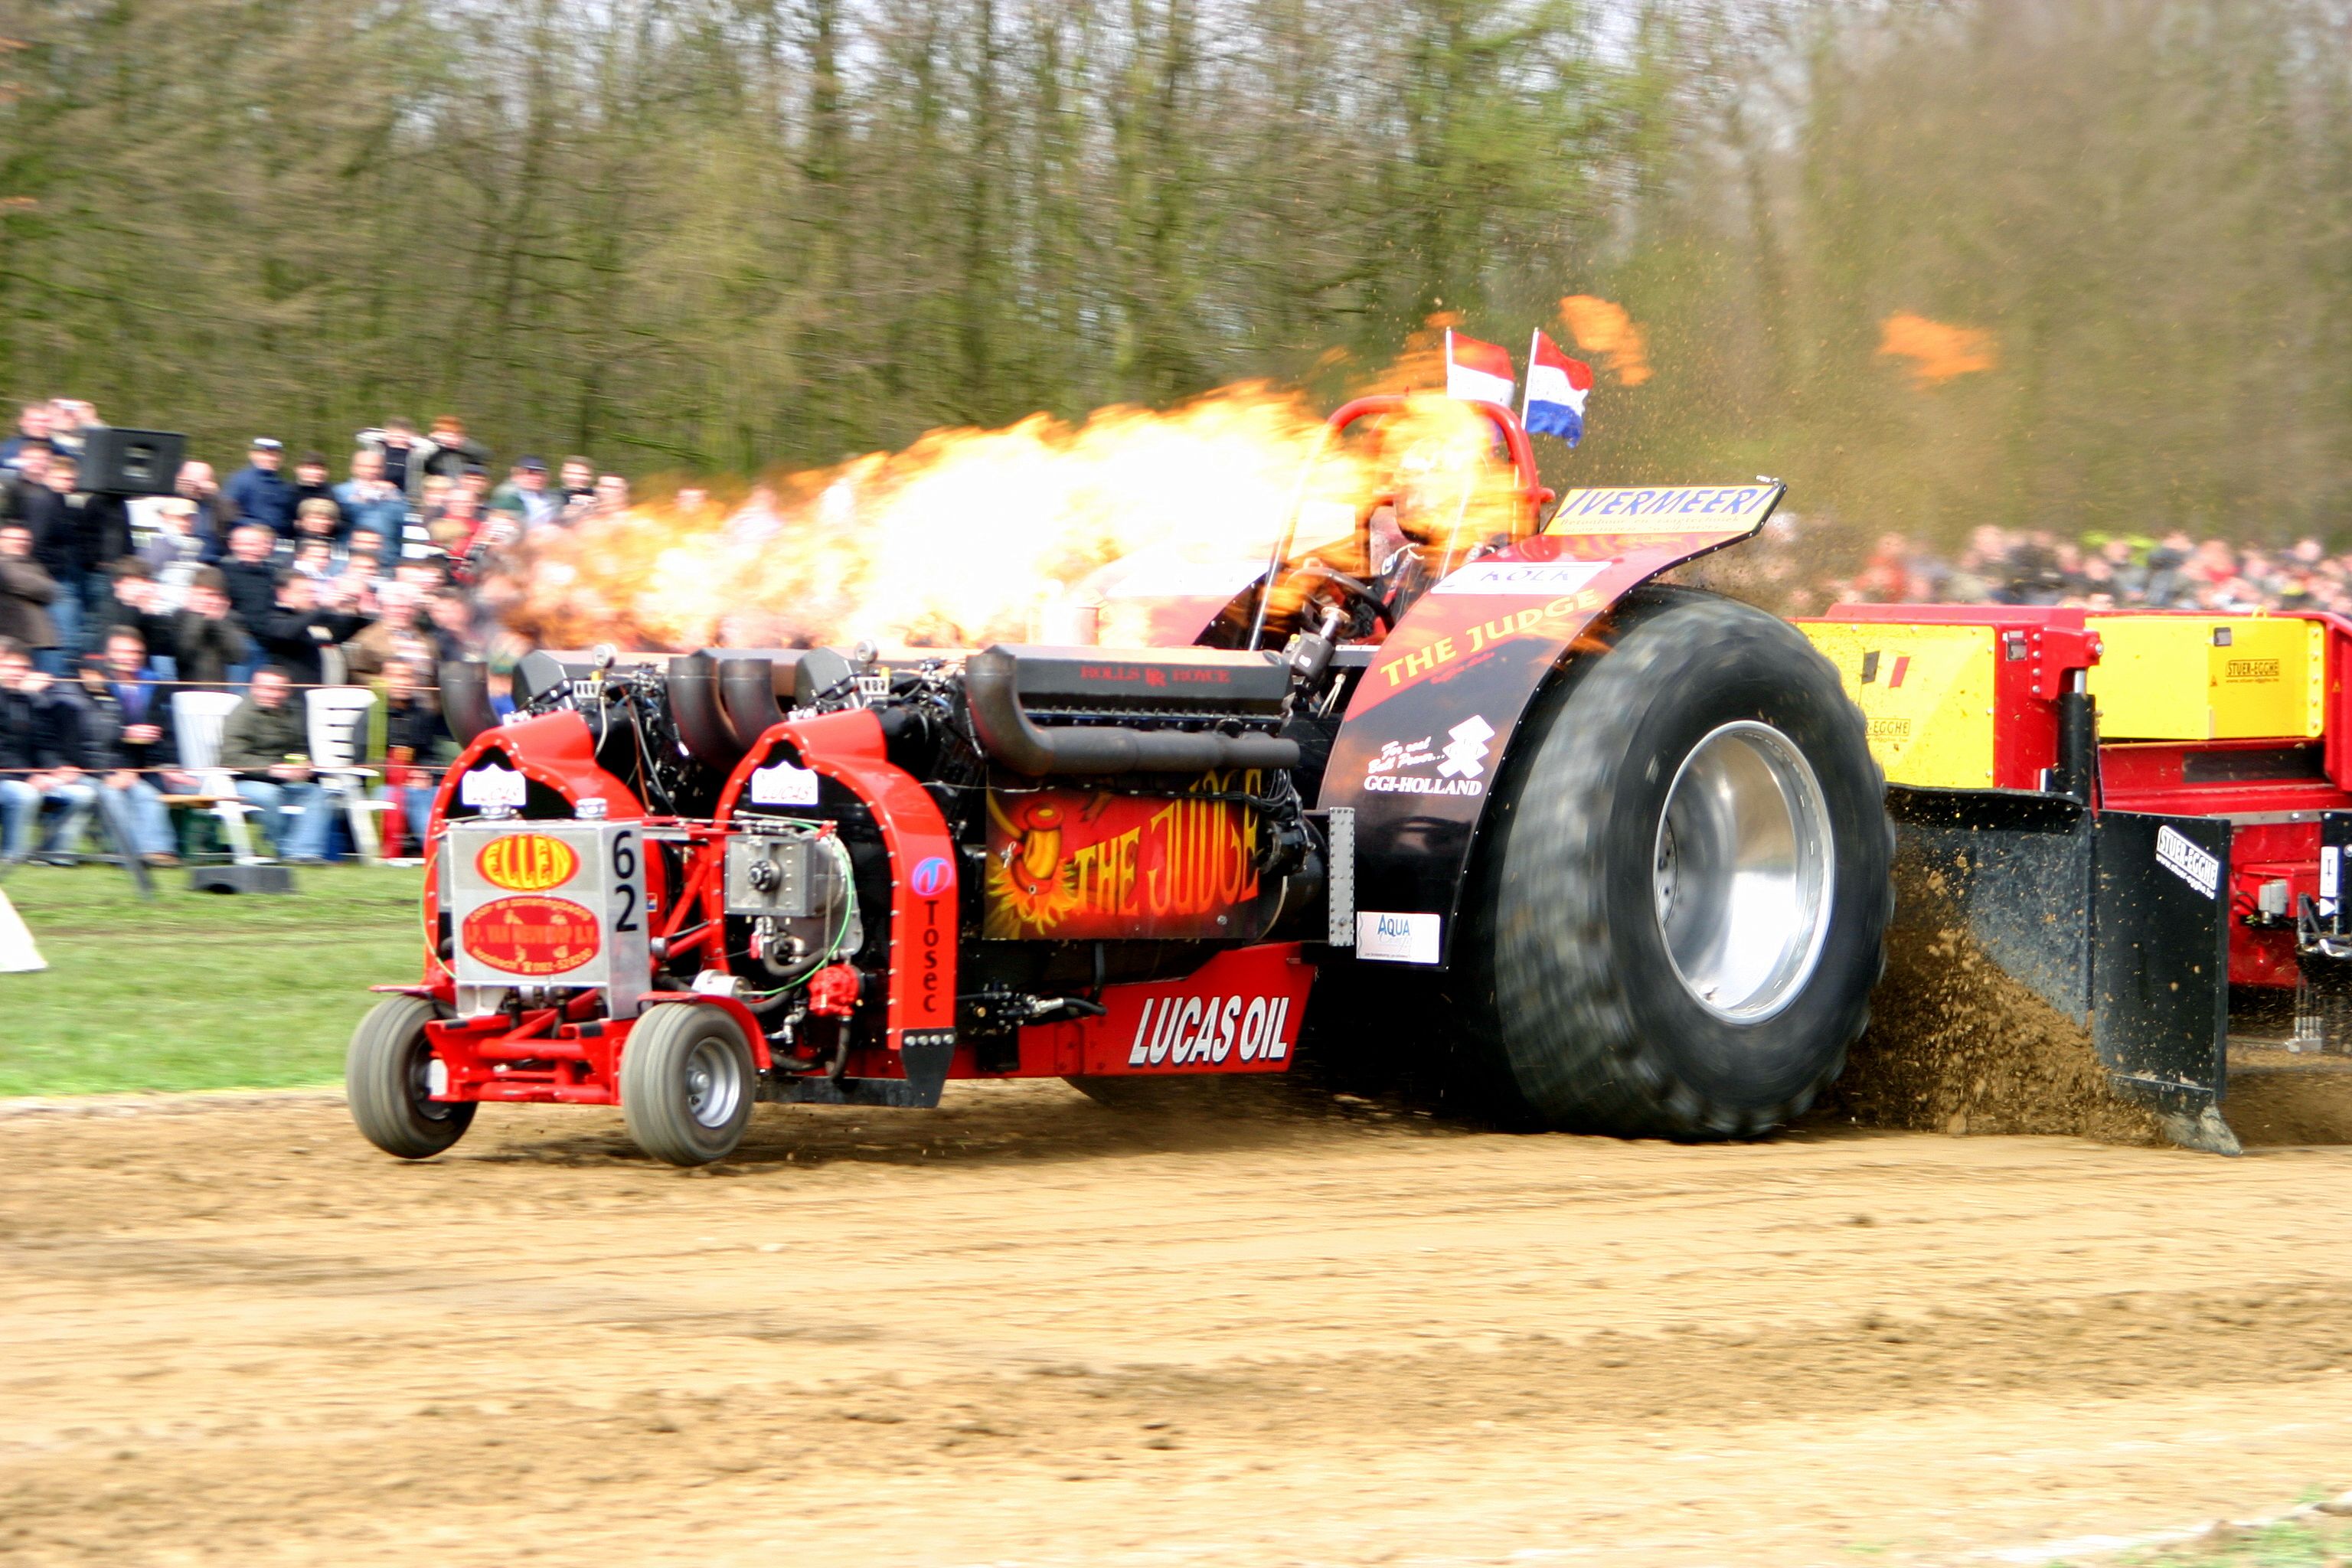 TRACTOR PULLING race racing hot rod rods tractor fire f JPG wallpaper 3072x2048